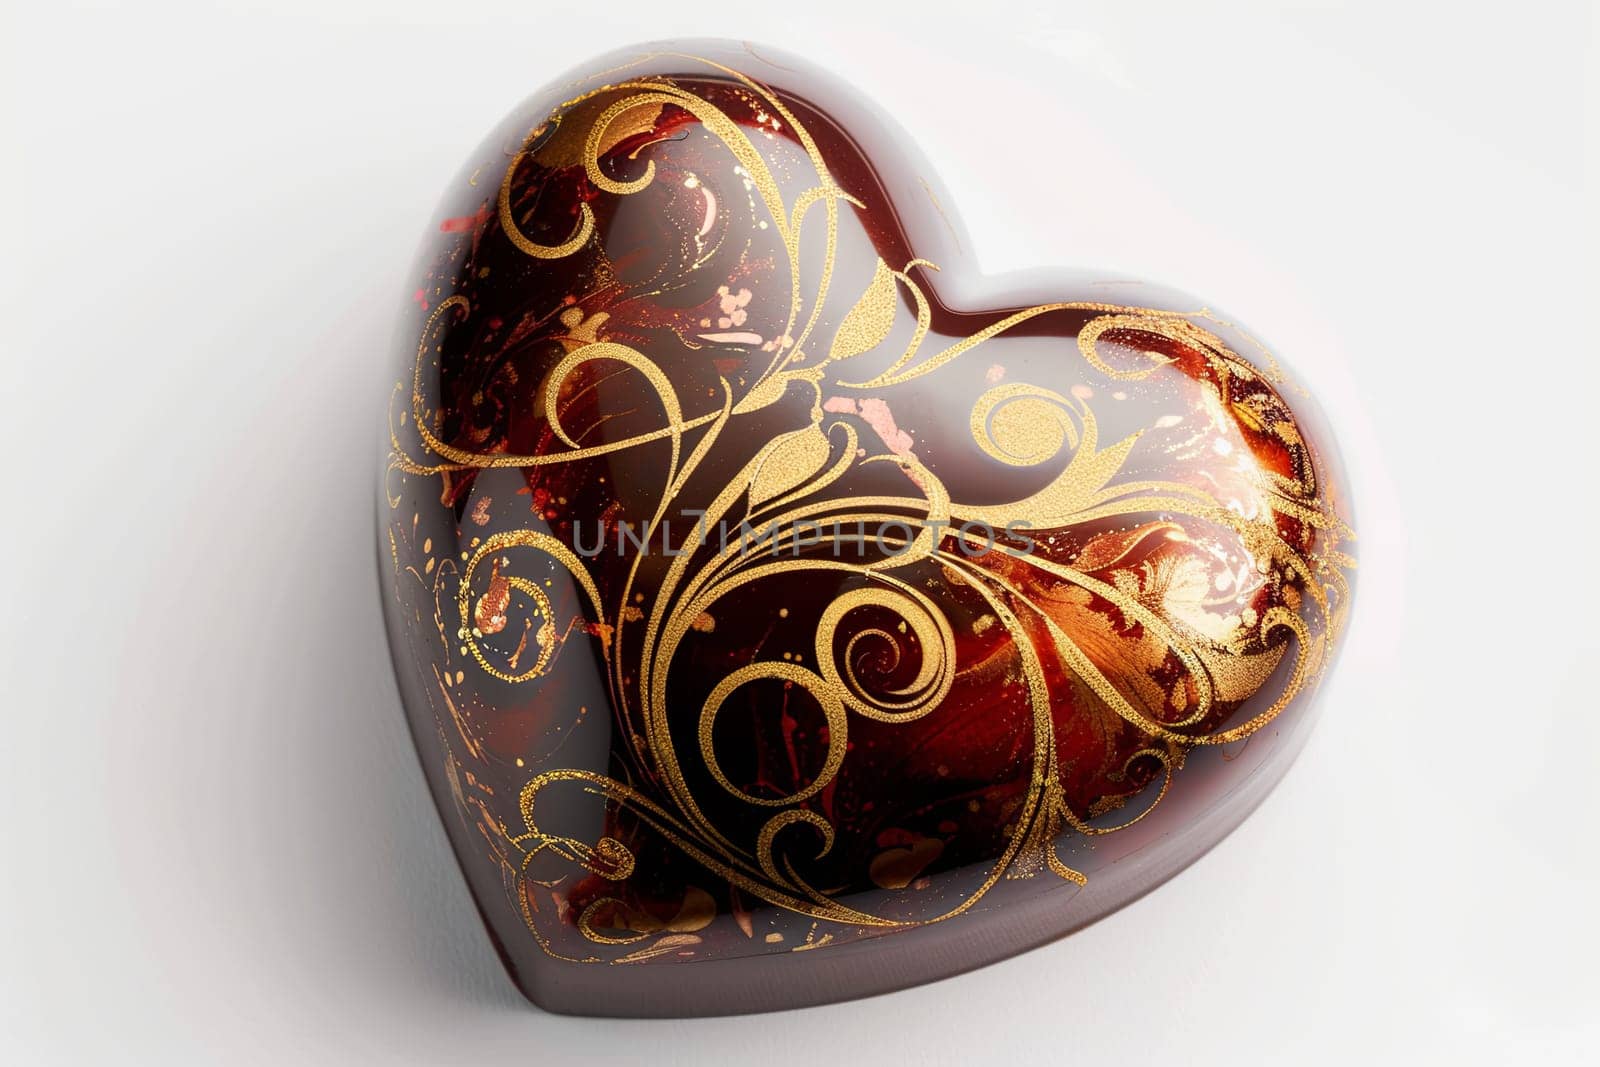 Heart shaped box with intricate gold designs, elegant and romantic, on a white background.